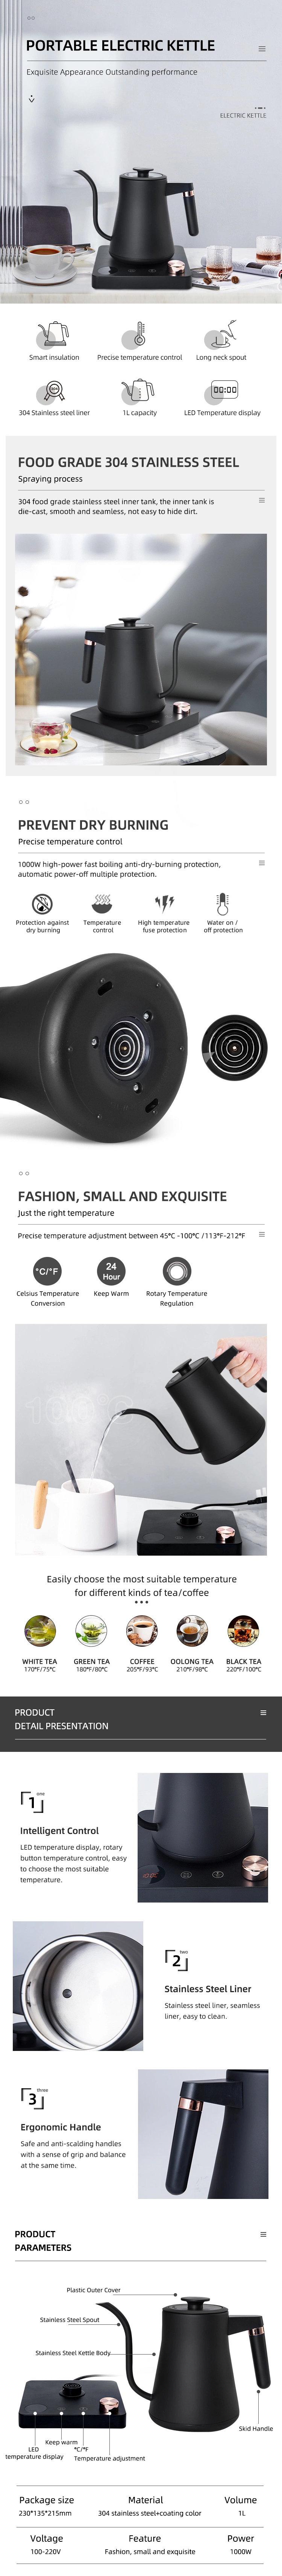 OEM Hot Sale Portable Electric Kettle Stainless Steel 24 Hour to Keep Warm Electric Kettle